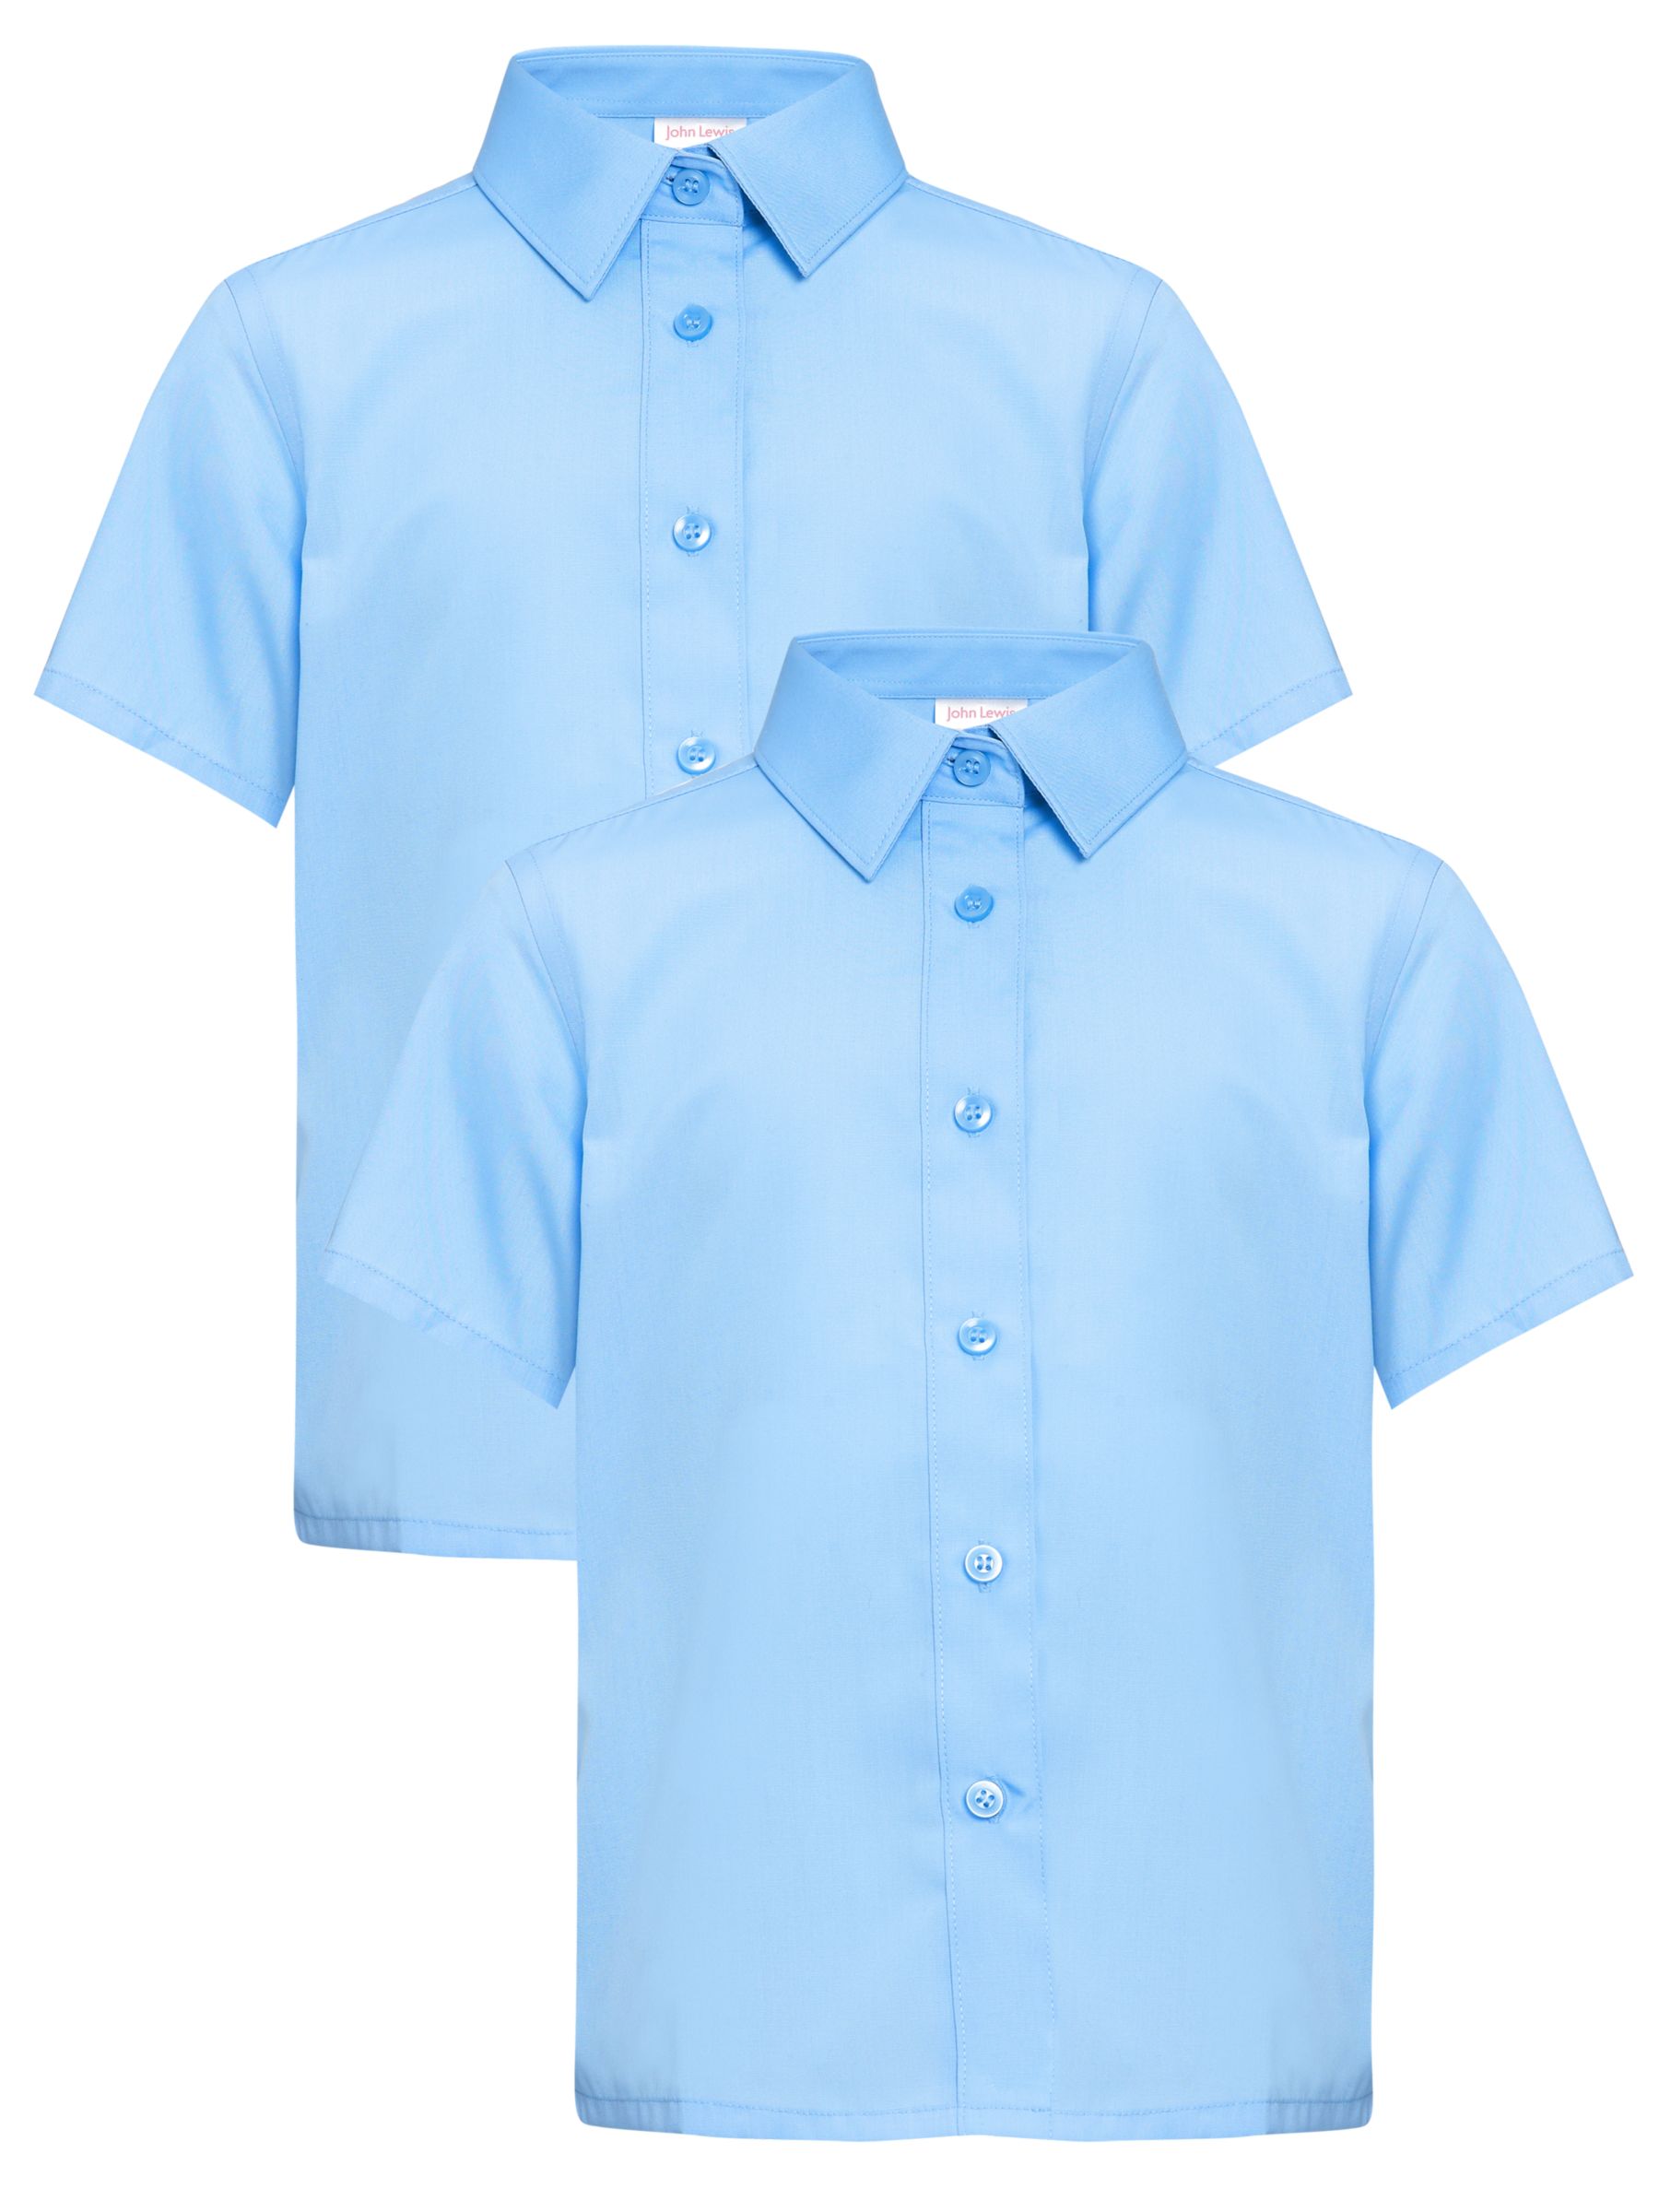 Short Sleeved Button to Neck Blouses,